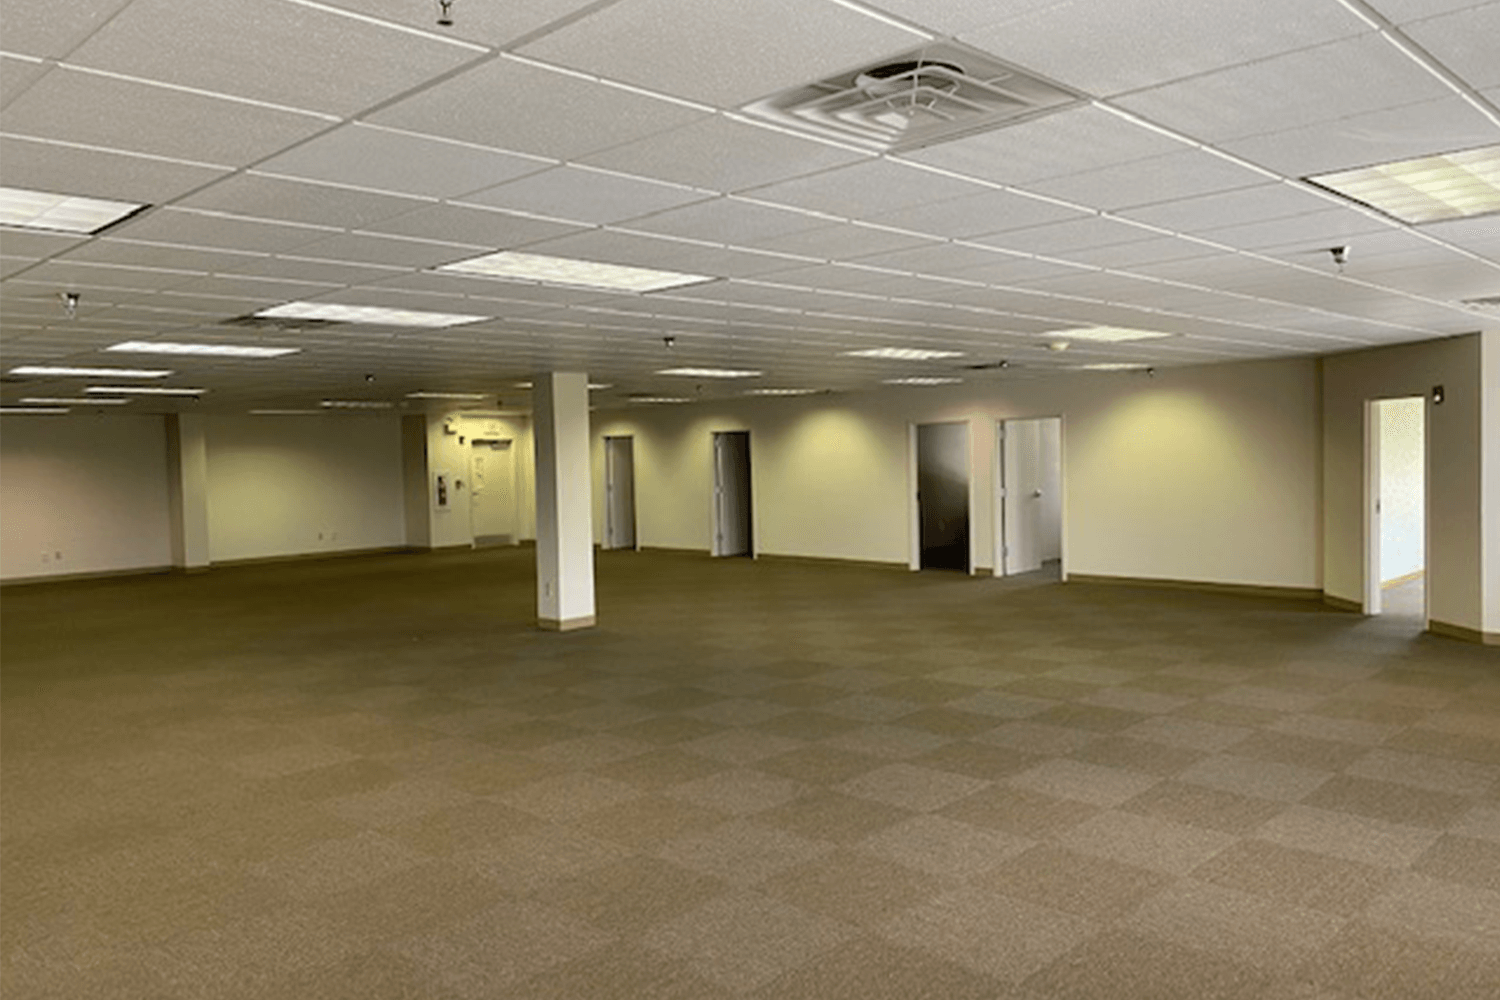 large empty room with tan carpet and white walls